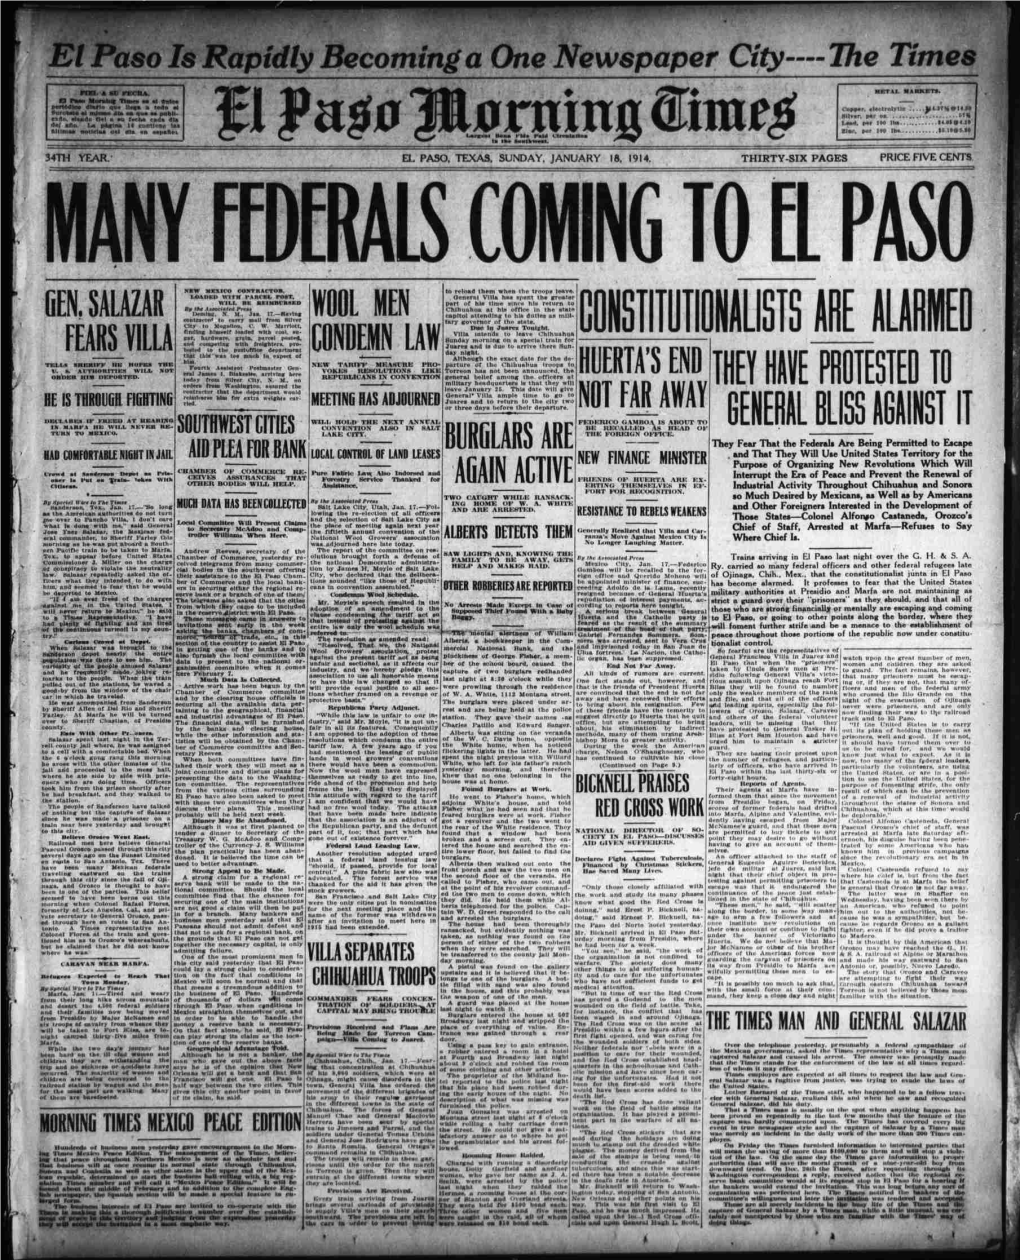 MANY FEDERALS COMING to El PASO